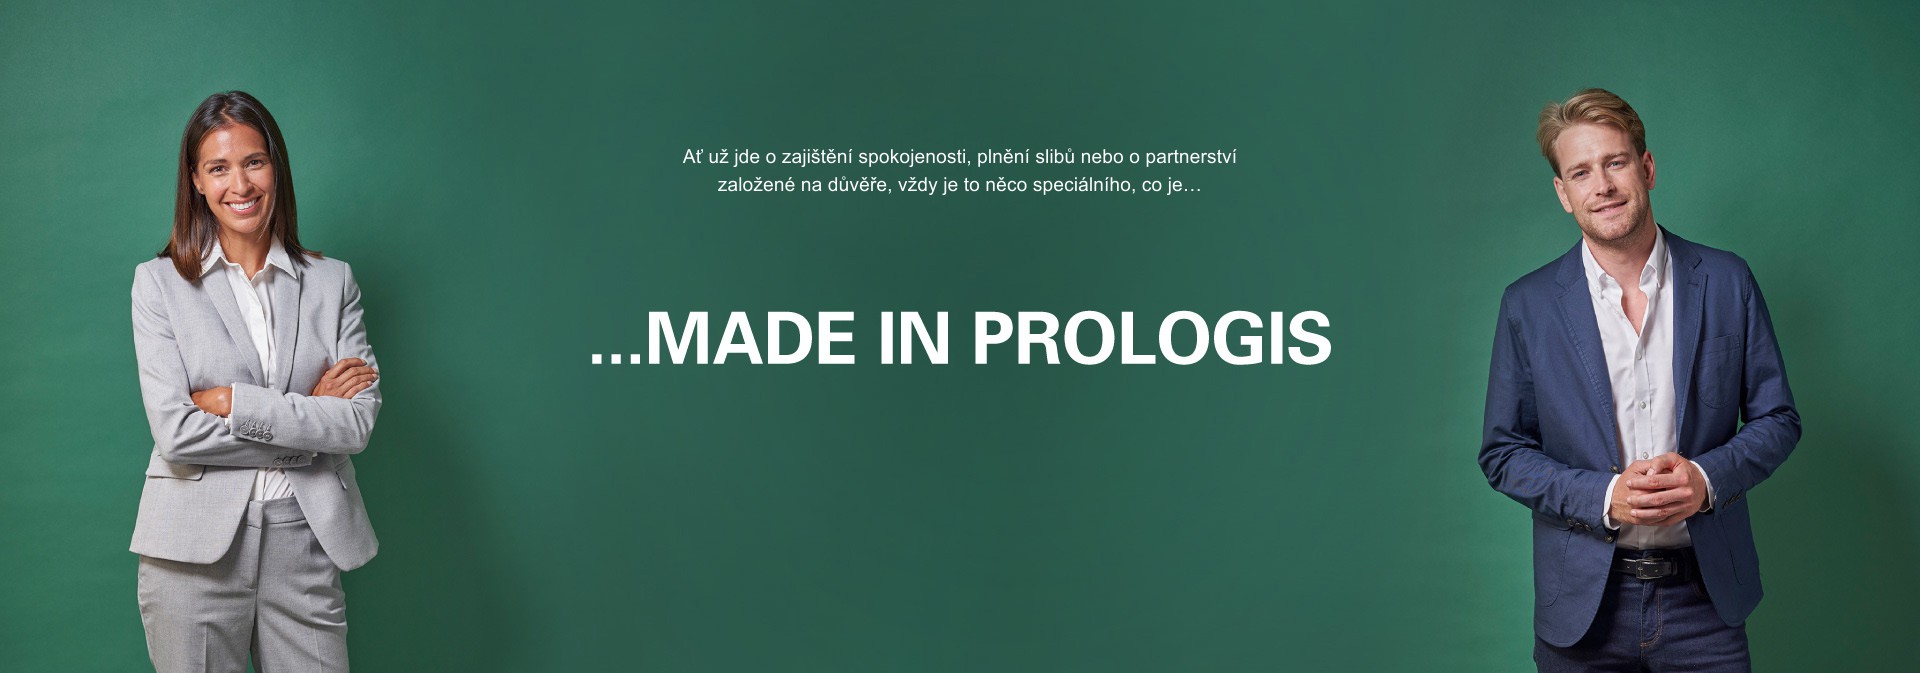 MADE IN PROLOGIS